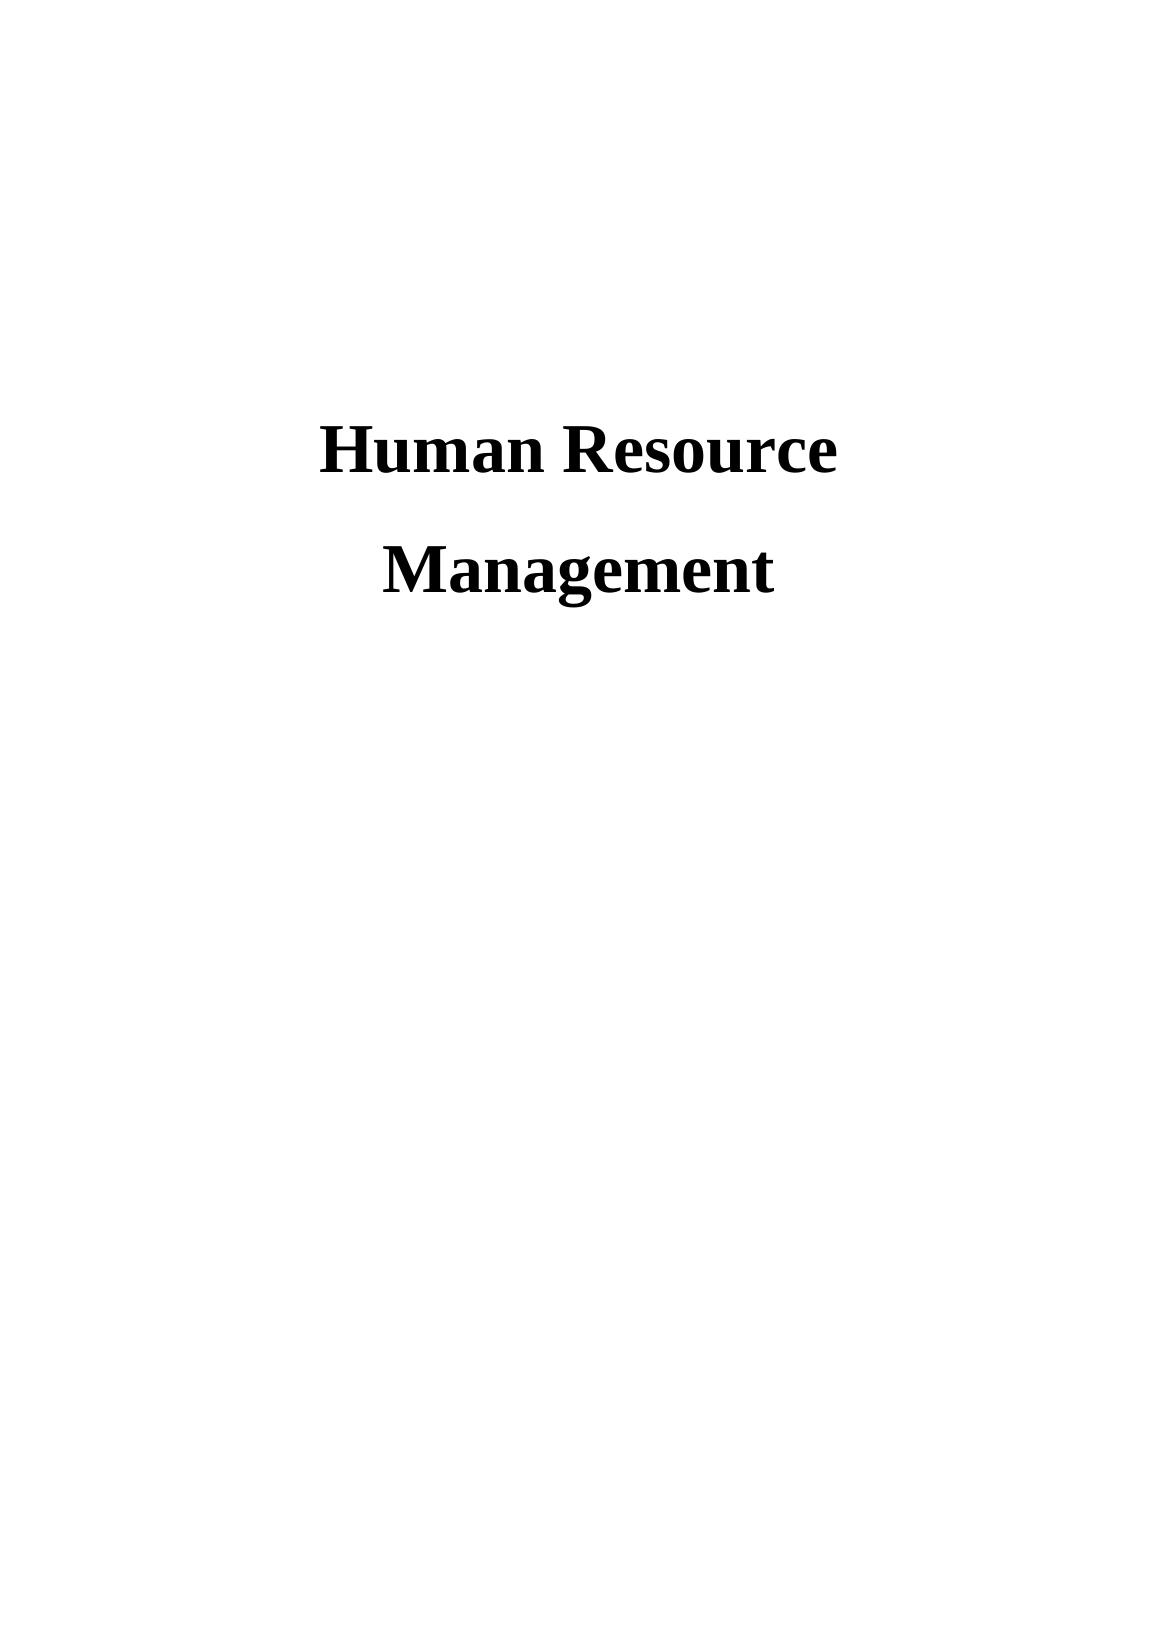 Human Resource Management : Case Study of The Lending Holiday Company_1